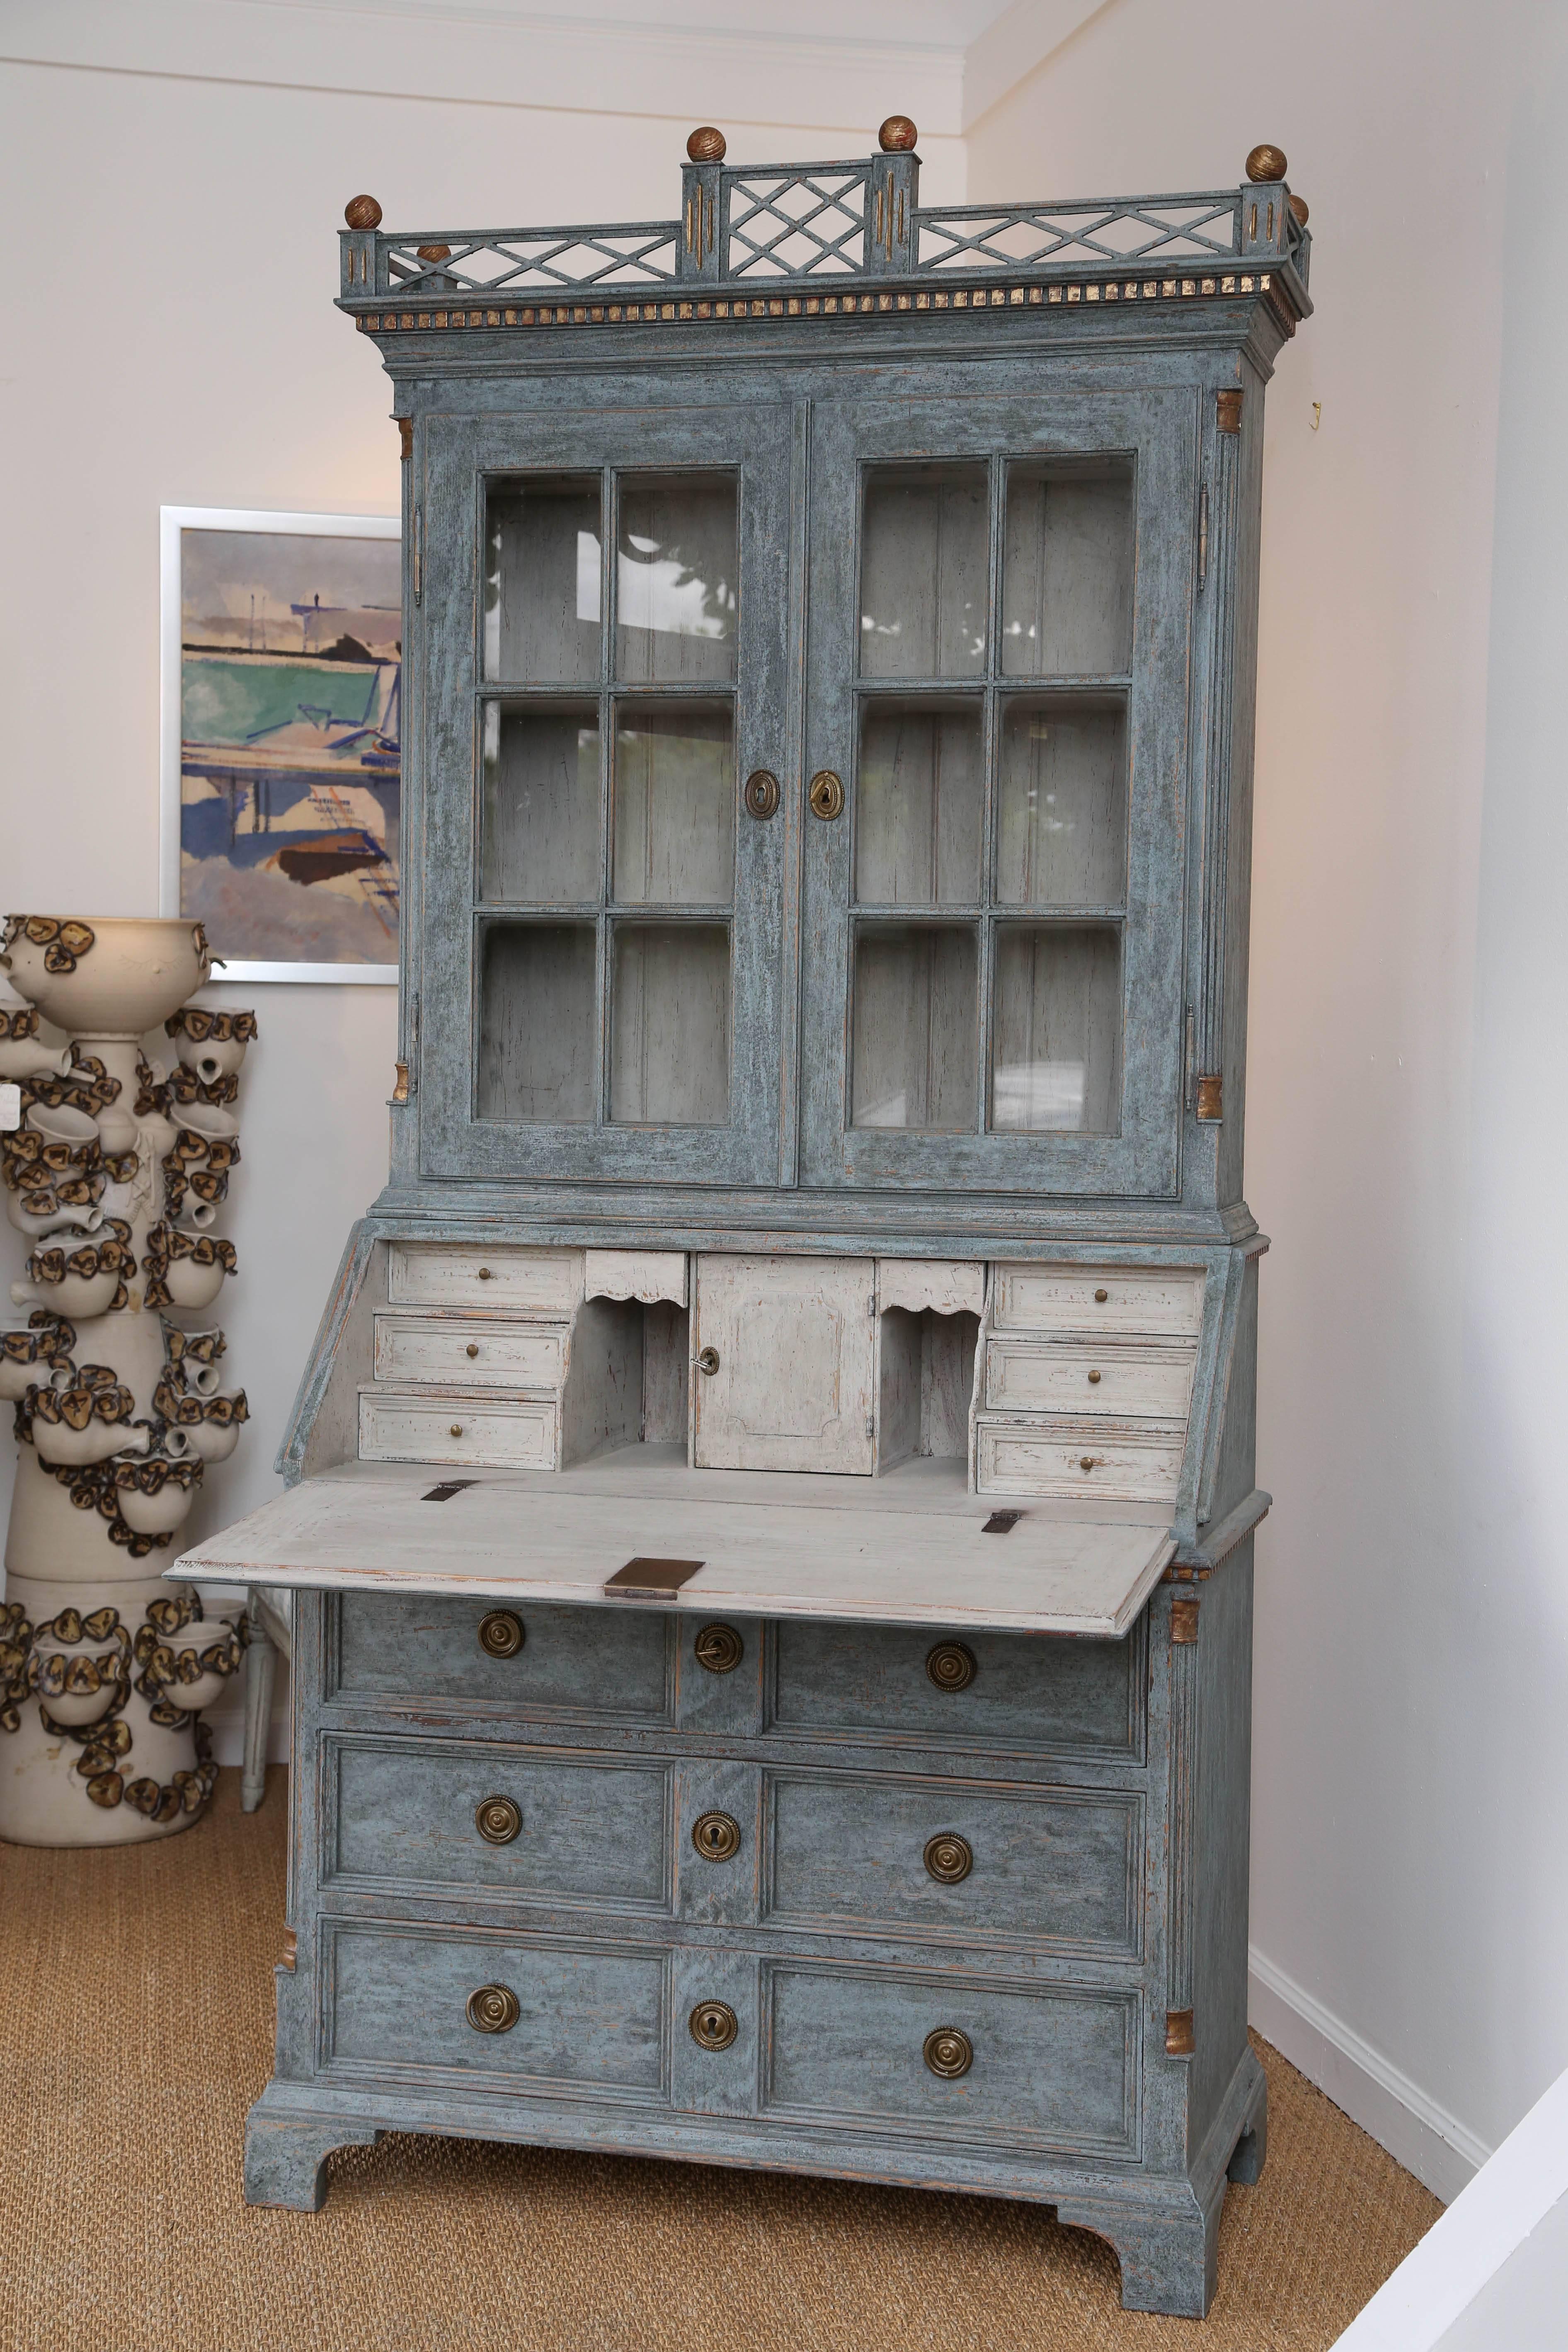 Antique Swedish Gustavian style painted secretary-bookcase mid-19th century
Painted in Swedish blue distressed with gold leaf accents.
Top section has glass panel doors and two shelves, one bottom shelf, has a
fabulous canopy of fret work and